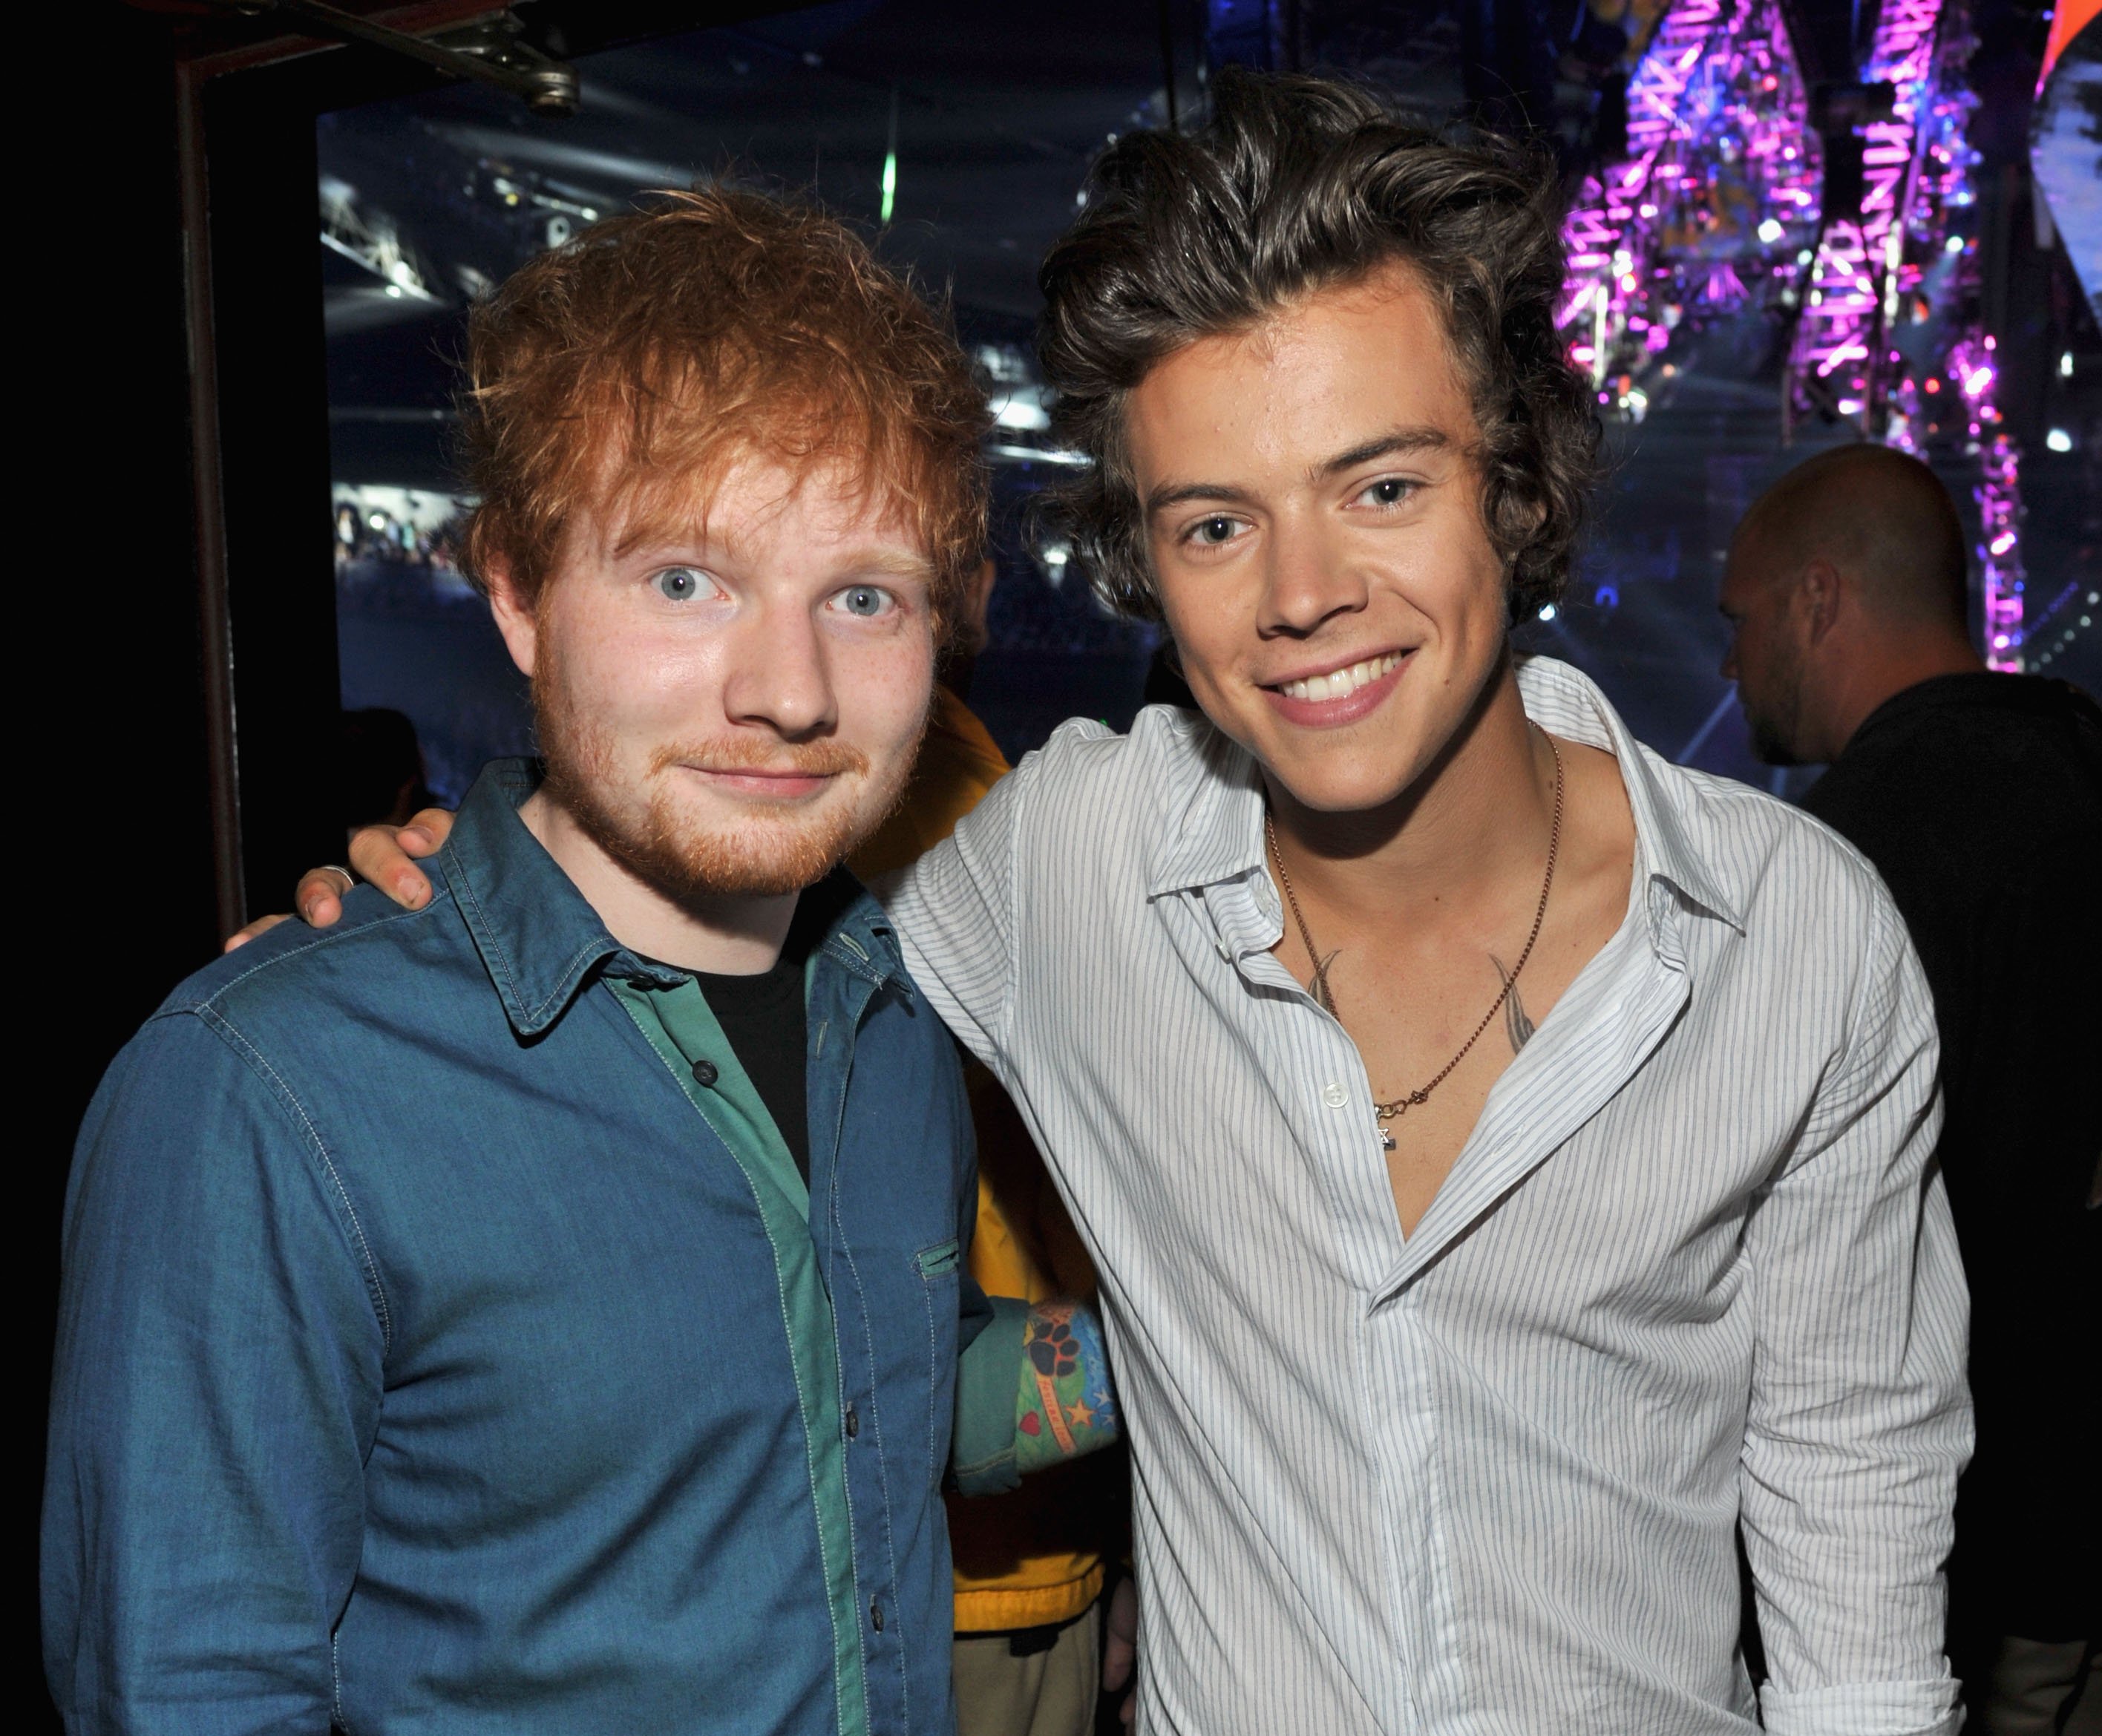 Ed Sheeran putting his arm around One Direction's Harry Styles